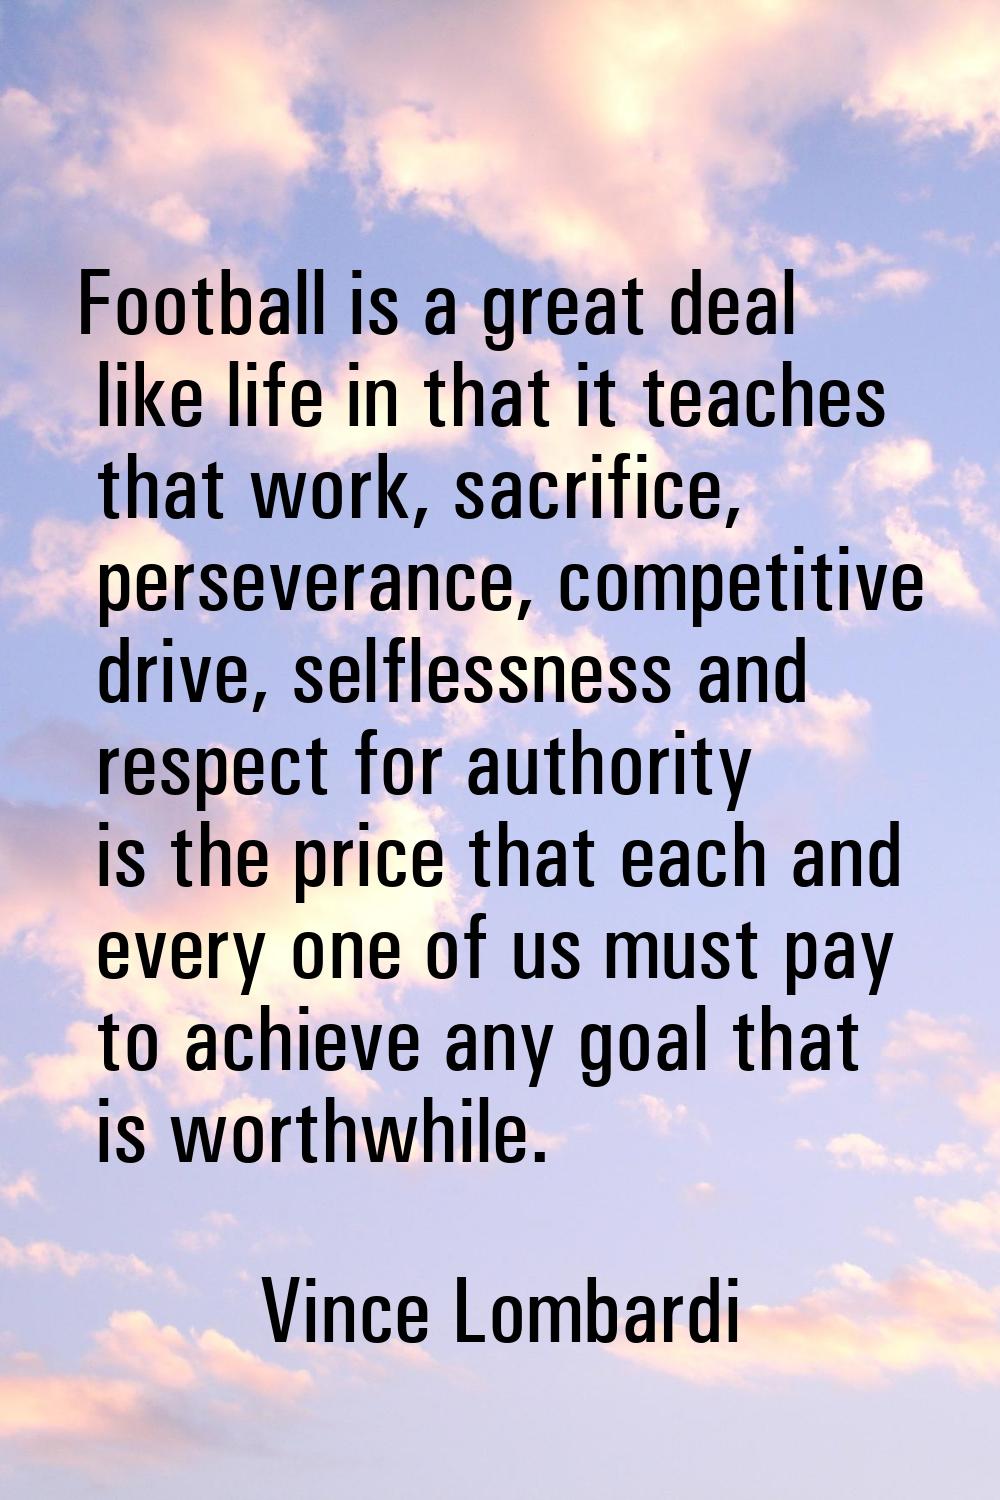 Football is a great deal like life in that it teaches that work, sacrifice, perseverance, competiti